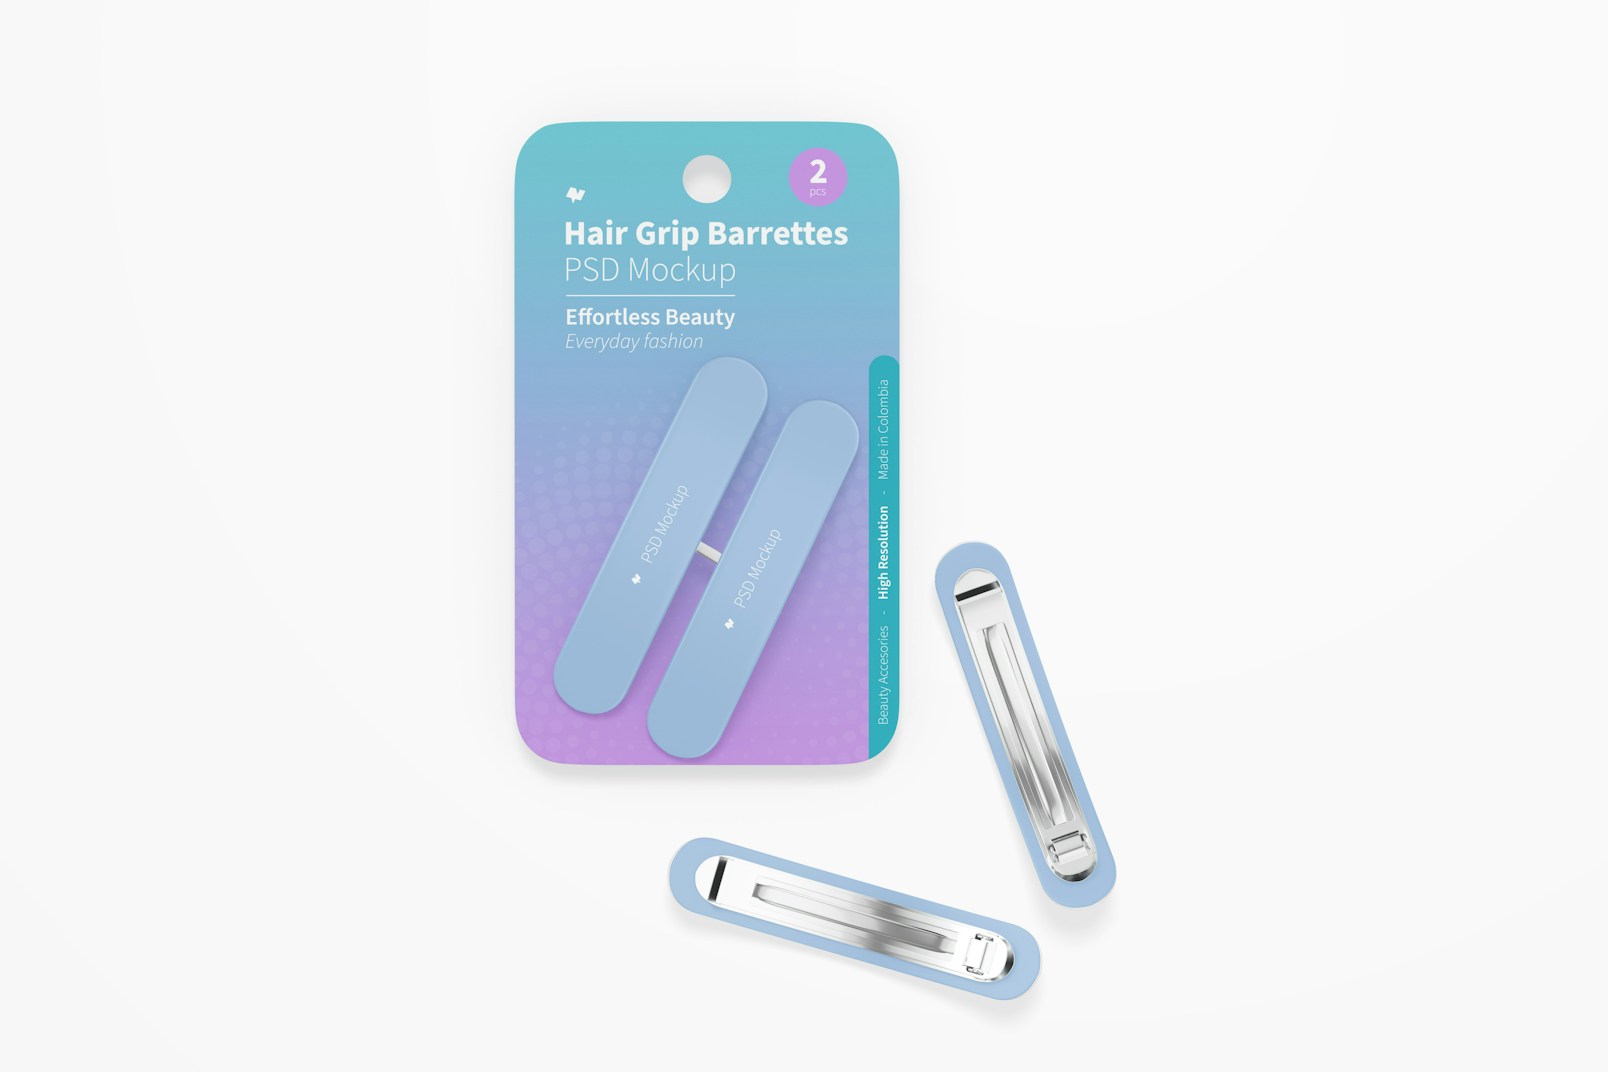 Hair Grip Barrettes Blister Mockup, Top View